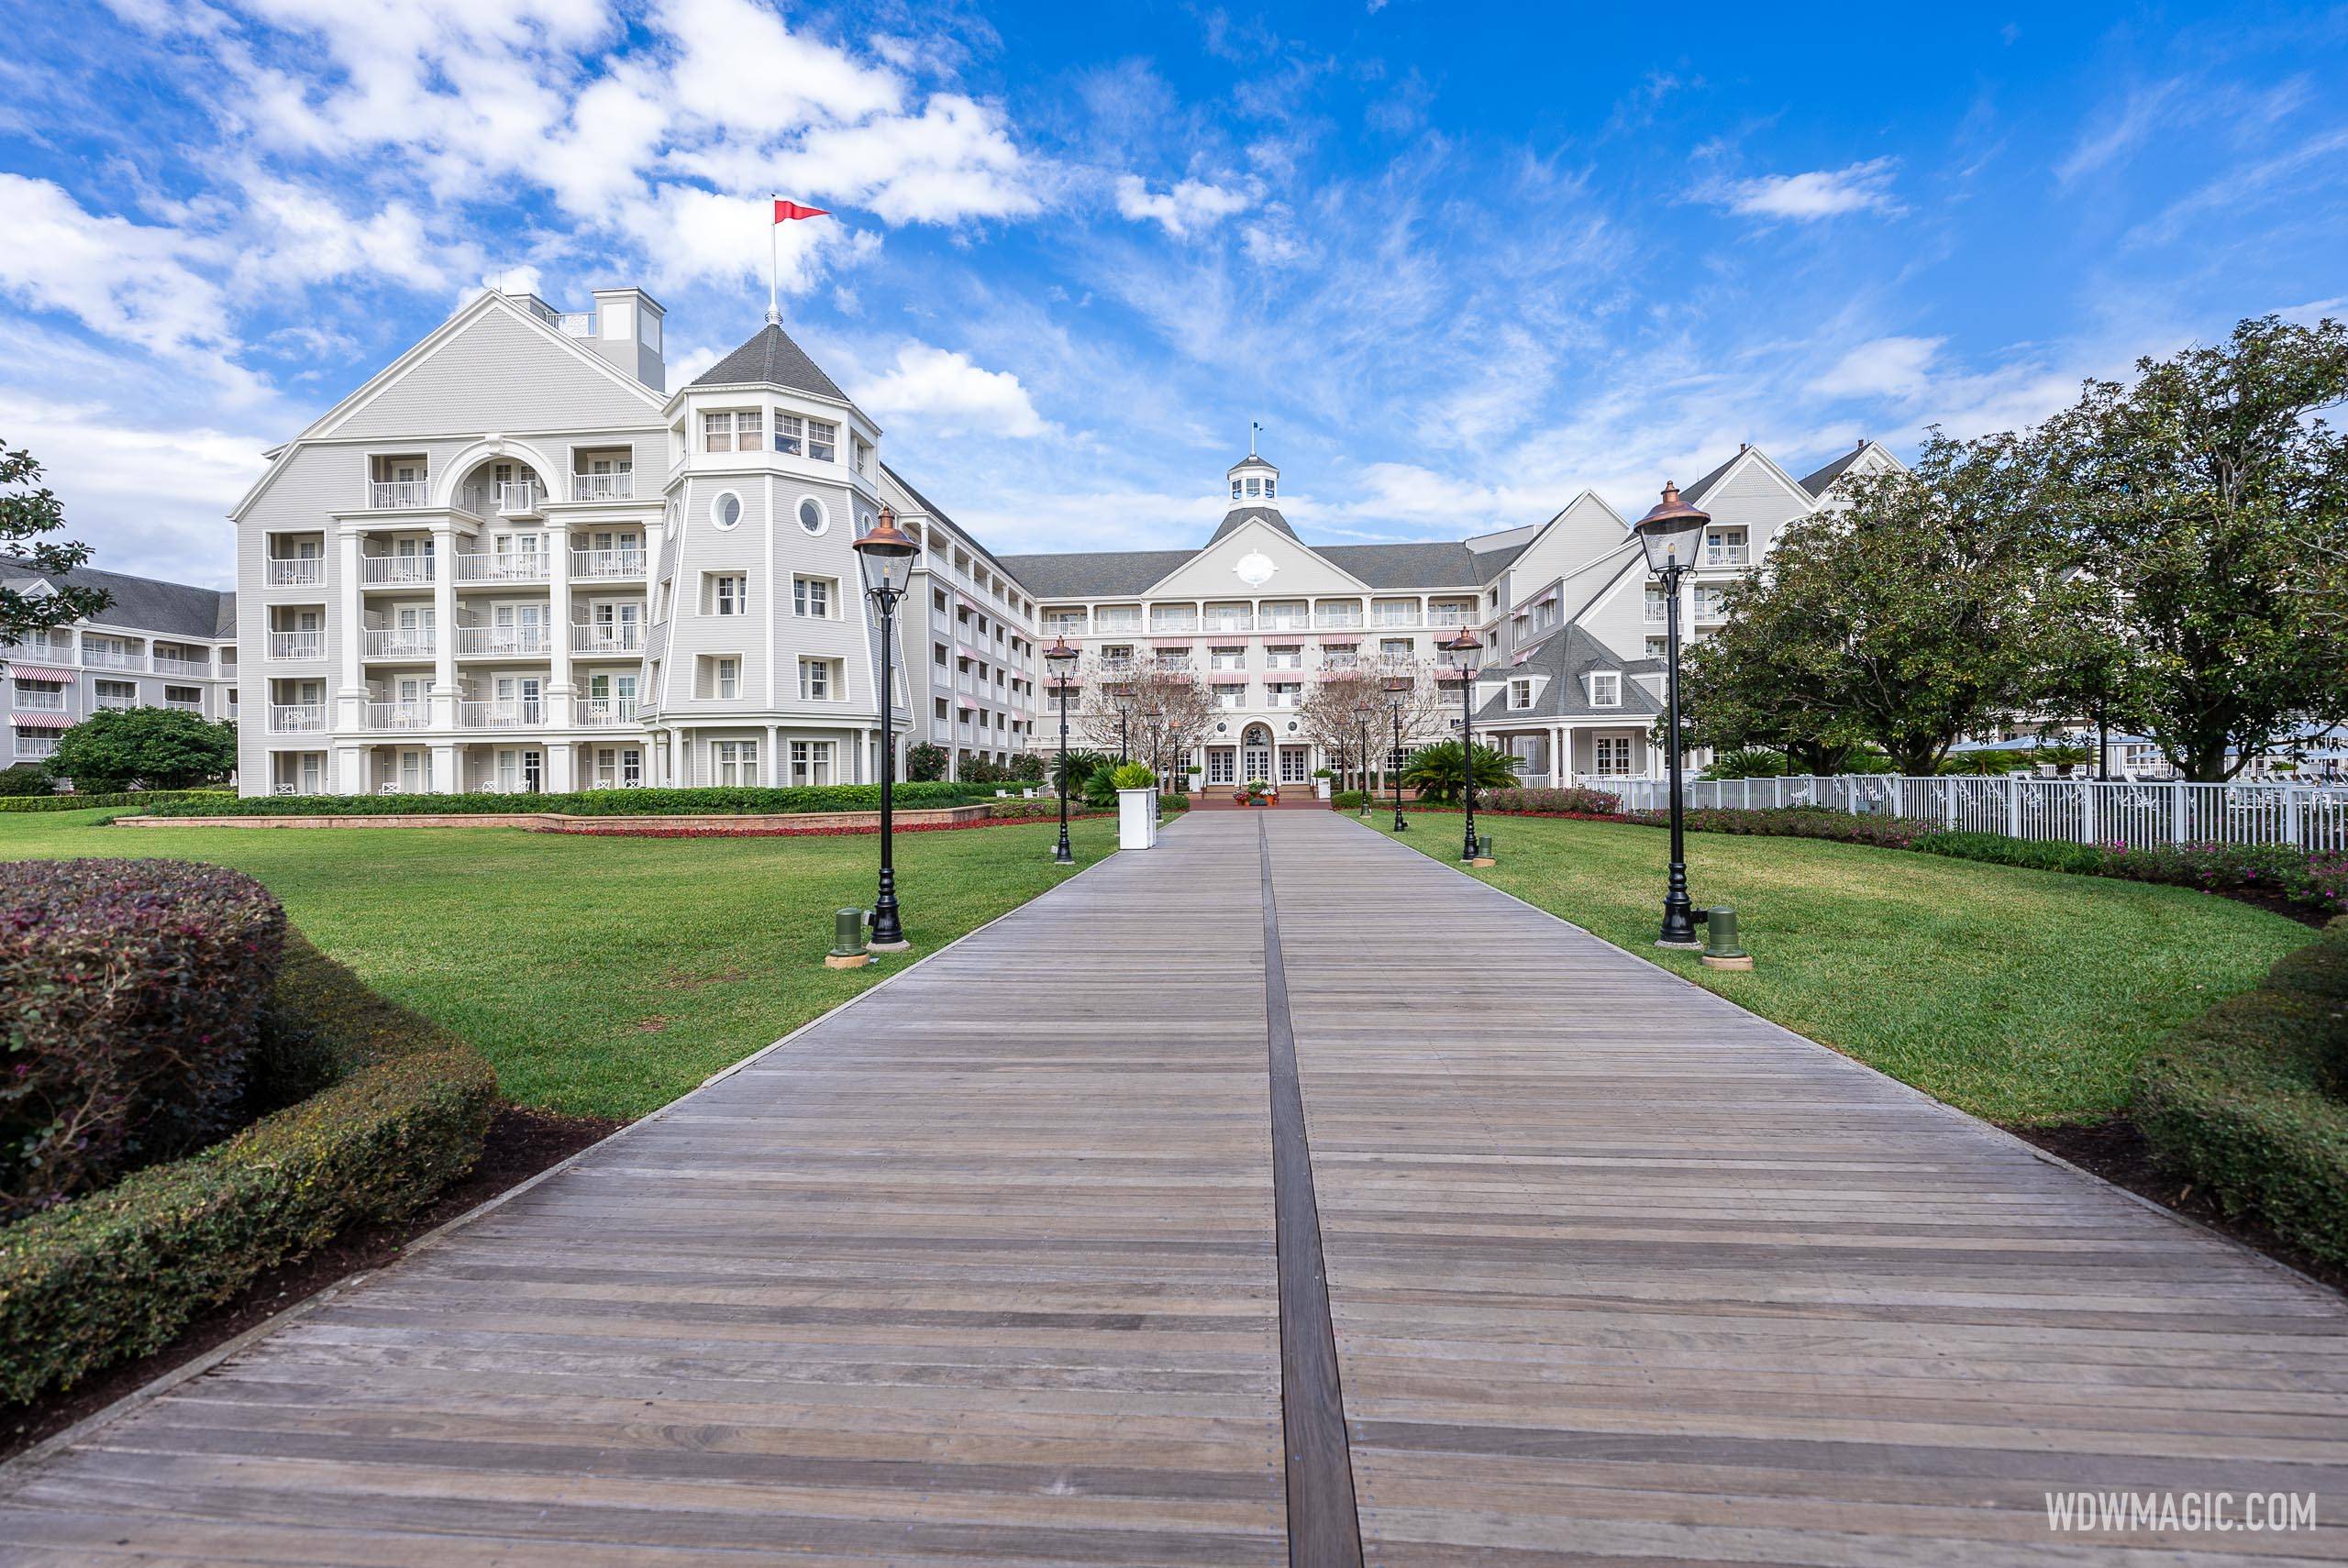 New Walt Disney World Resort hotel discount for Annual Passholders during early 2023